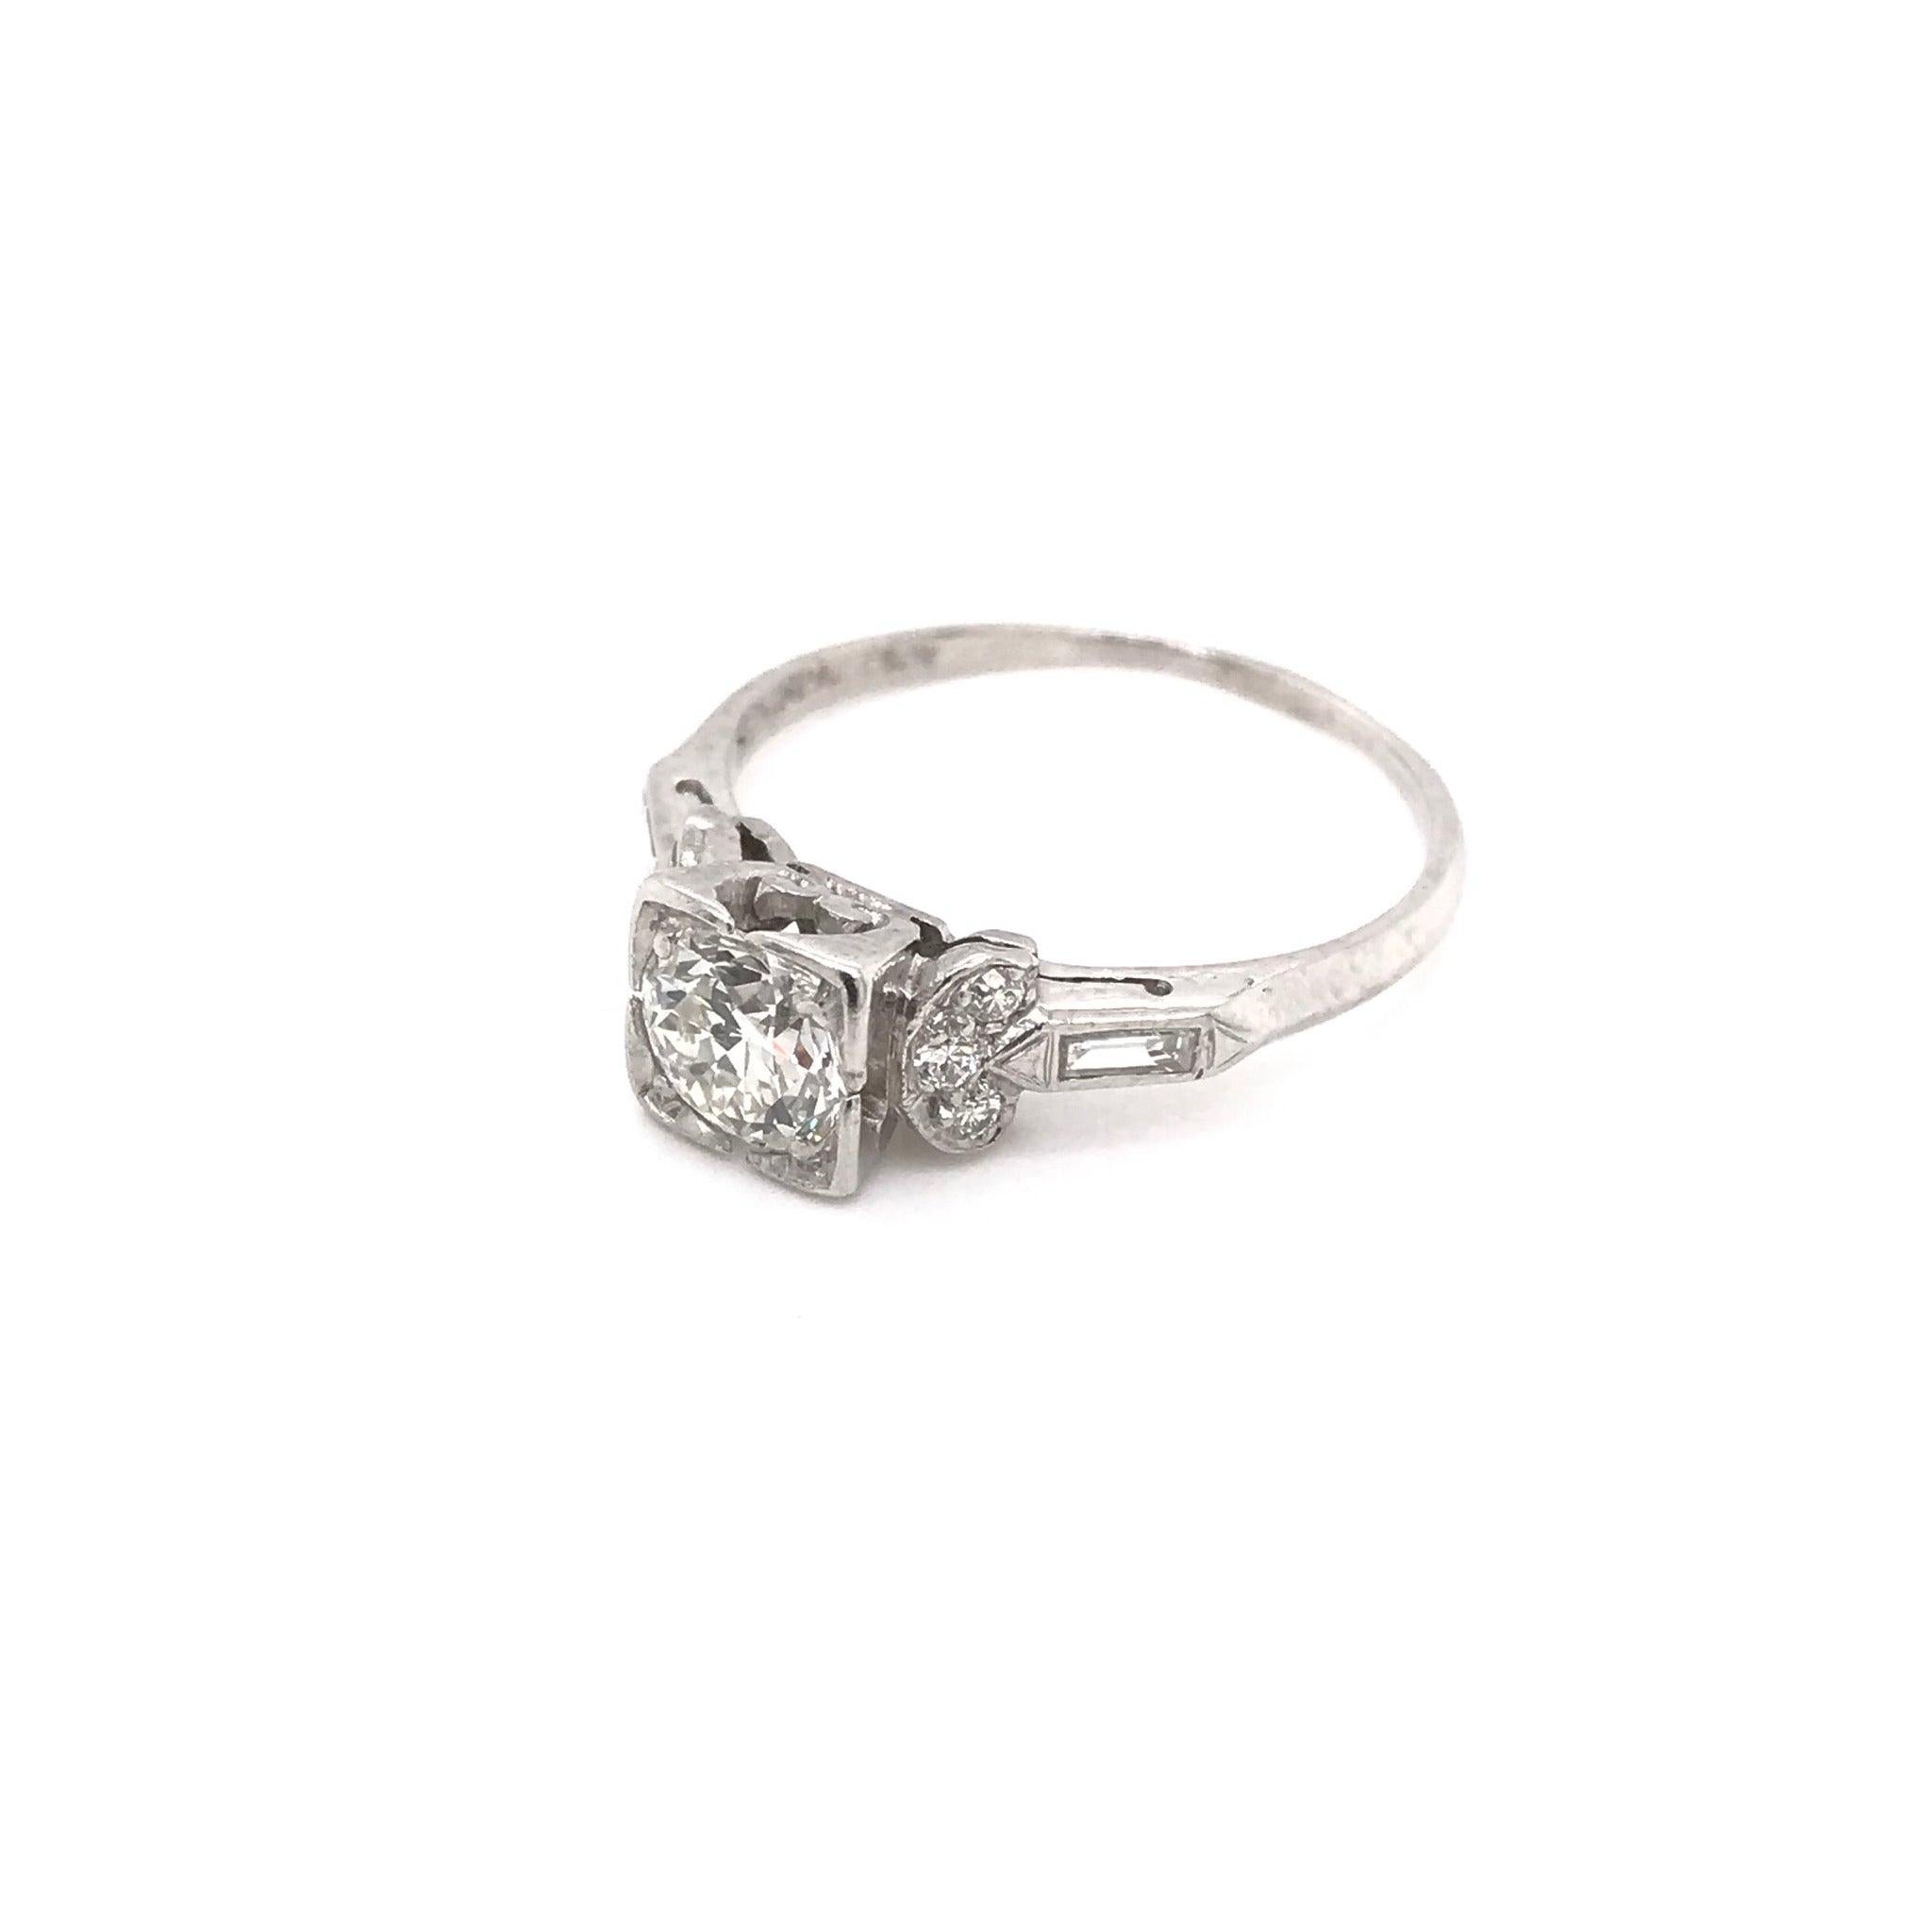 This ring was handcrafted sometime during the Art Deco design period ( 1920-1940 ). The setting is platinum and features a center diamond measuring approximately 0.75 carats. The center diamond grades approximately J in color, VS2 in clarity. The